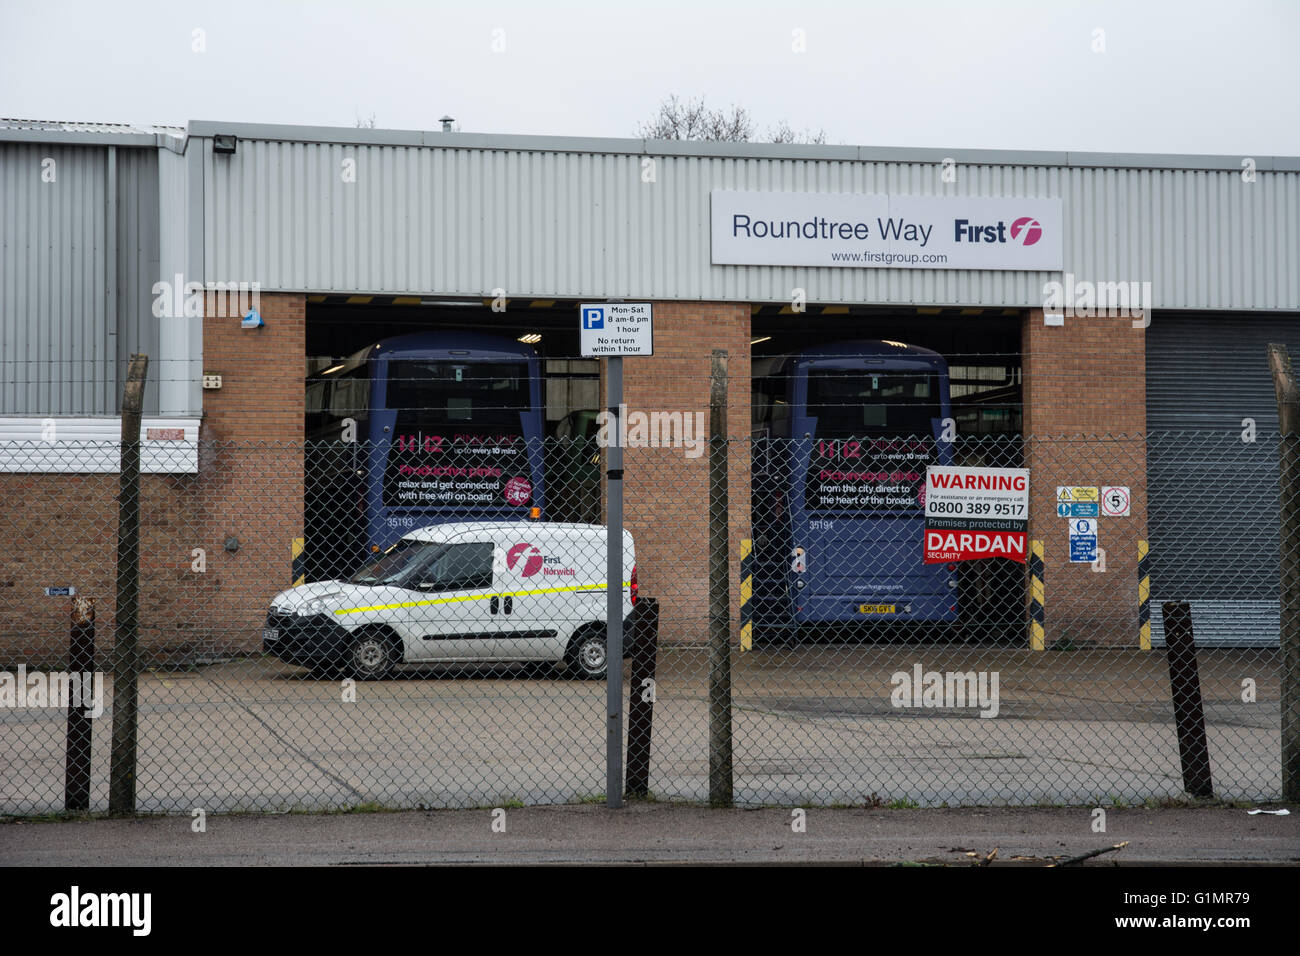 First bus depot hi-res stock photography and images - Alamy